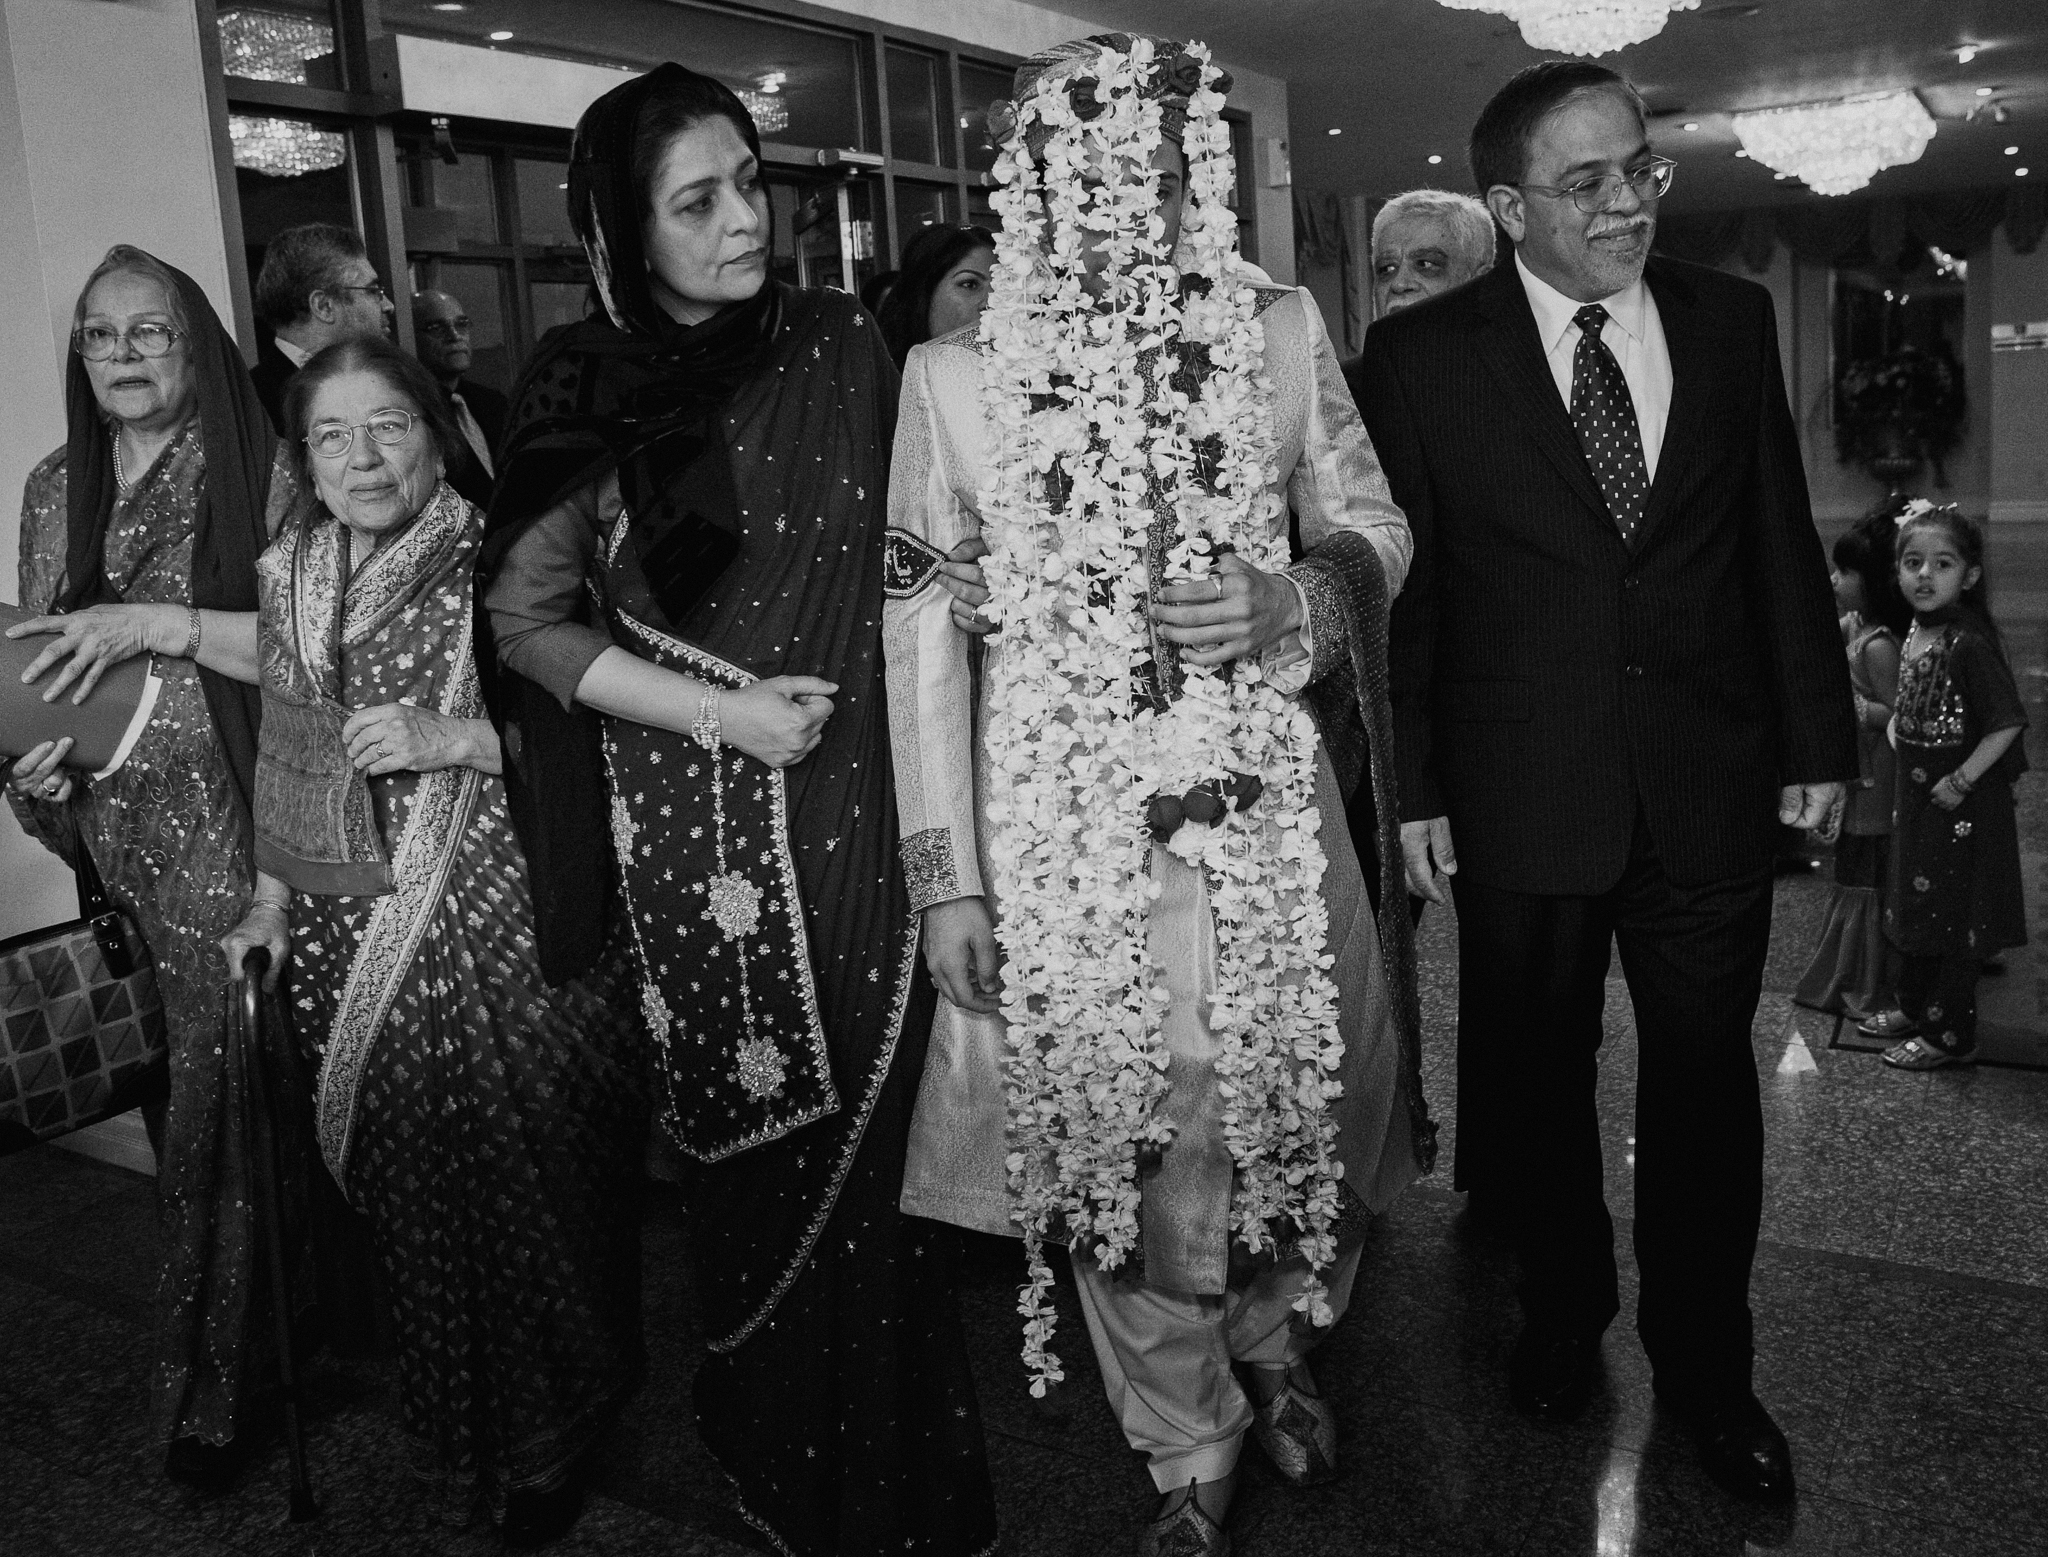 Indian groom in flower veil being led to ceremony by family